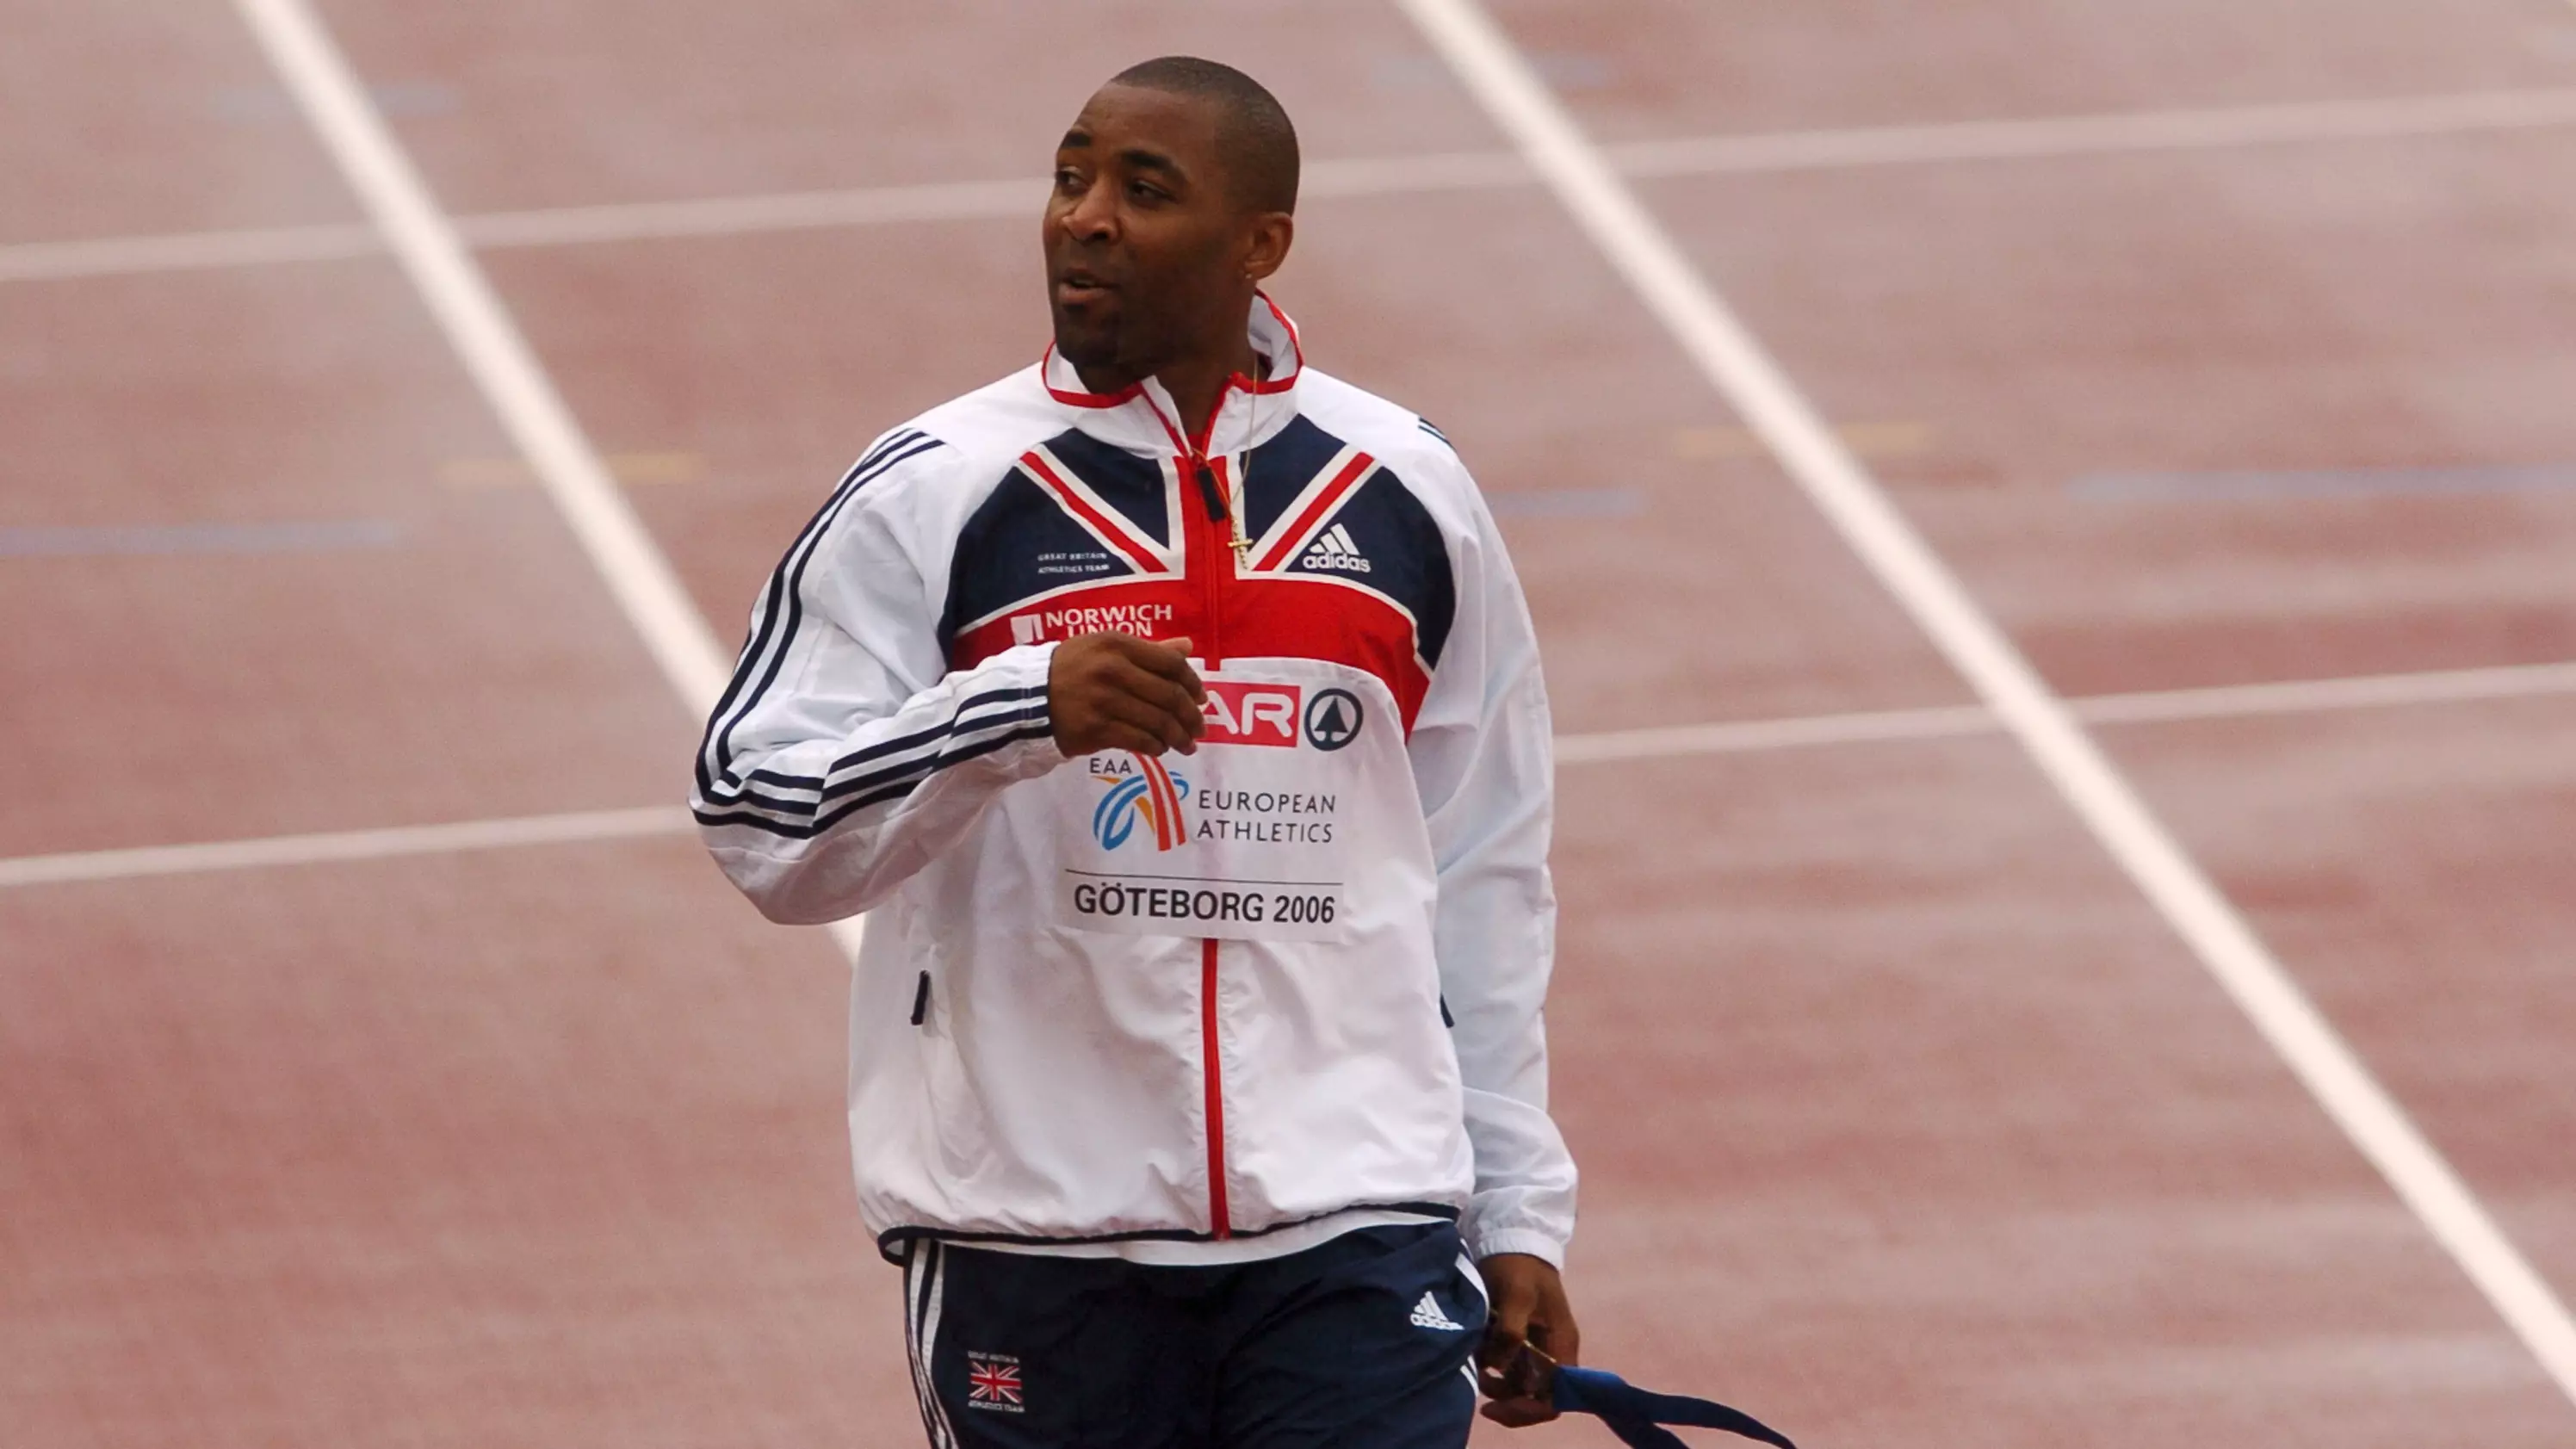 Darren Campbell Previews The World Athletics Championships